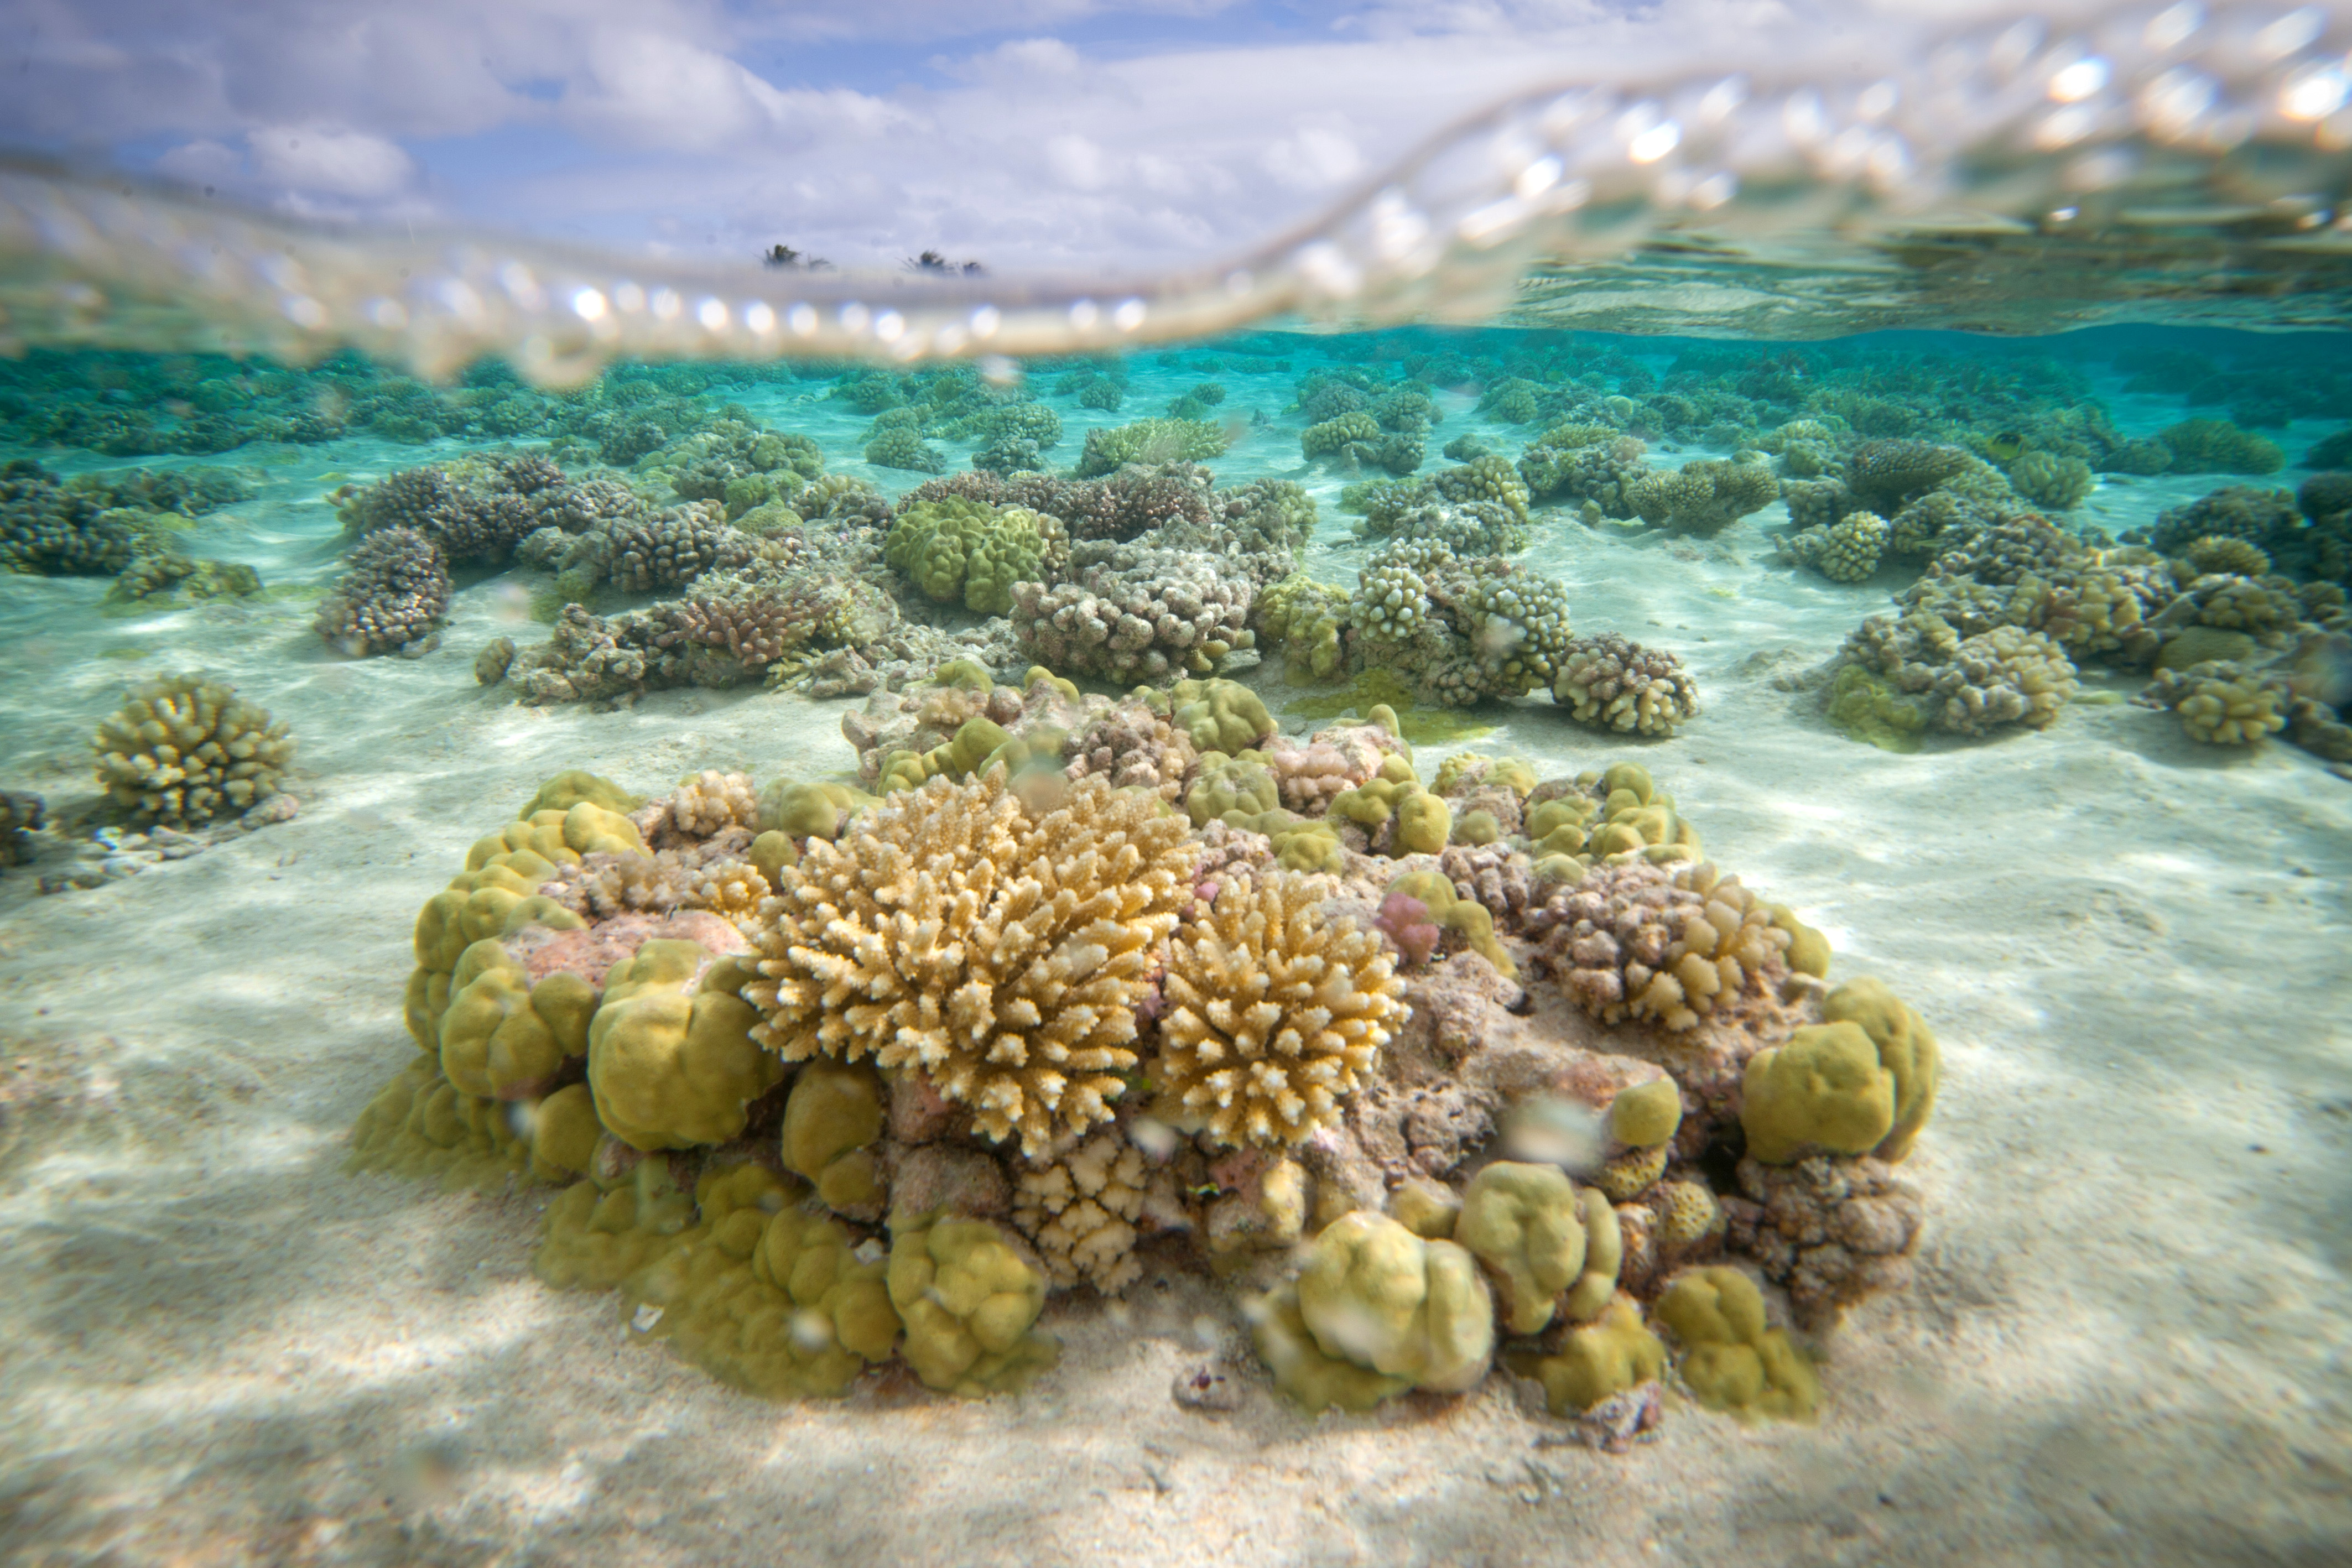 A picture shows coral reefs in the lagoon of the Toau atoll, about 400 kilometres (250 miles) from Tahiti in the Tuamotu Archipelago in the French polynesia, on October 18, 2015. AFP PHOTO / GREGORY BOISSY / AFP PHOTO / GREGORY BOISSY